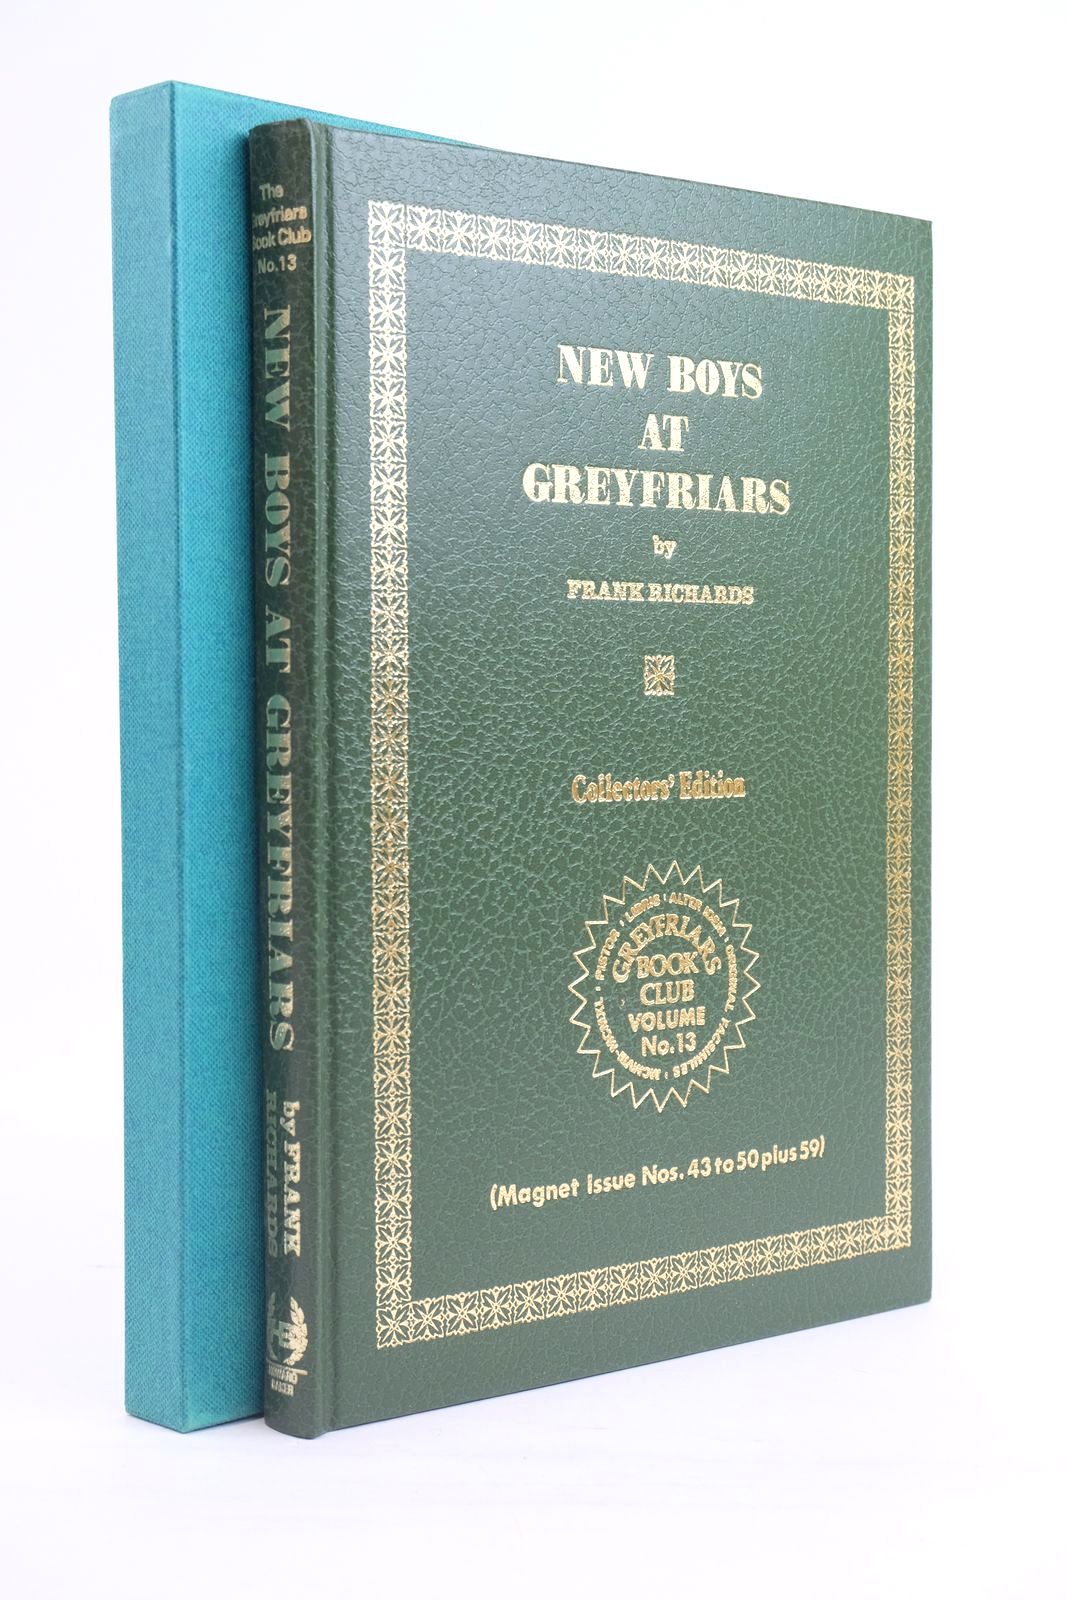 Photo of NEW BOYS AT GREYFRIARS written by Richards, Frank published by Howard Baker (STOCK CODE: 1319975)  for sale by Stella & Rose's Books